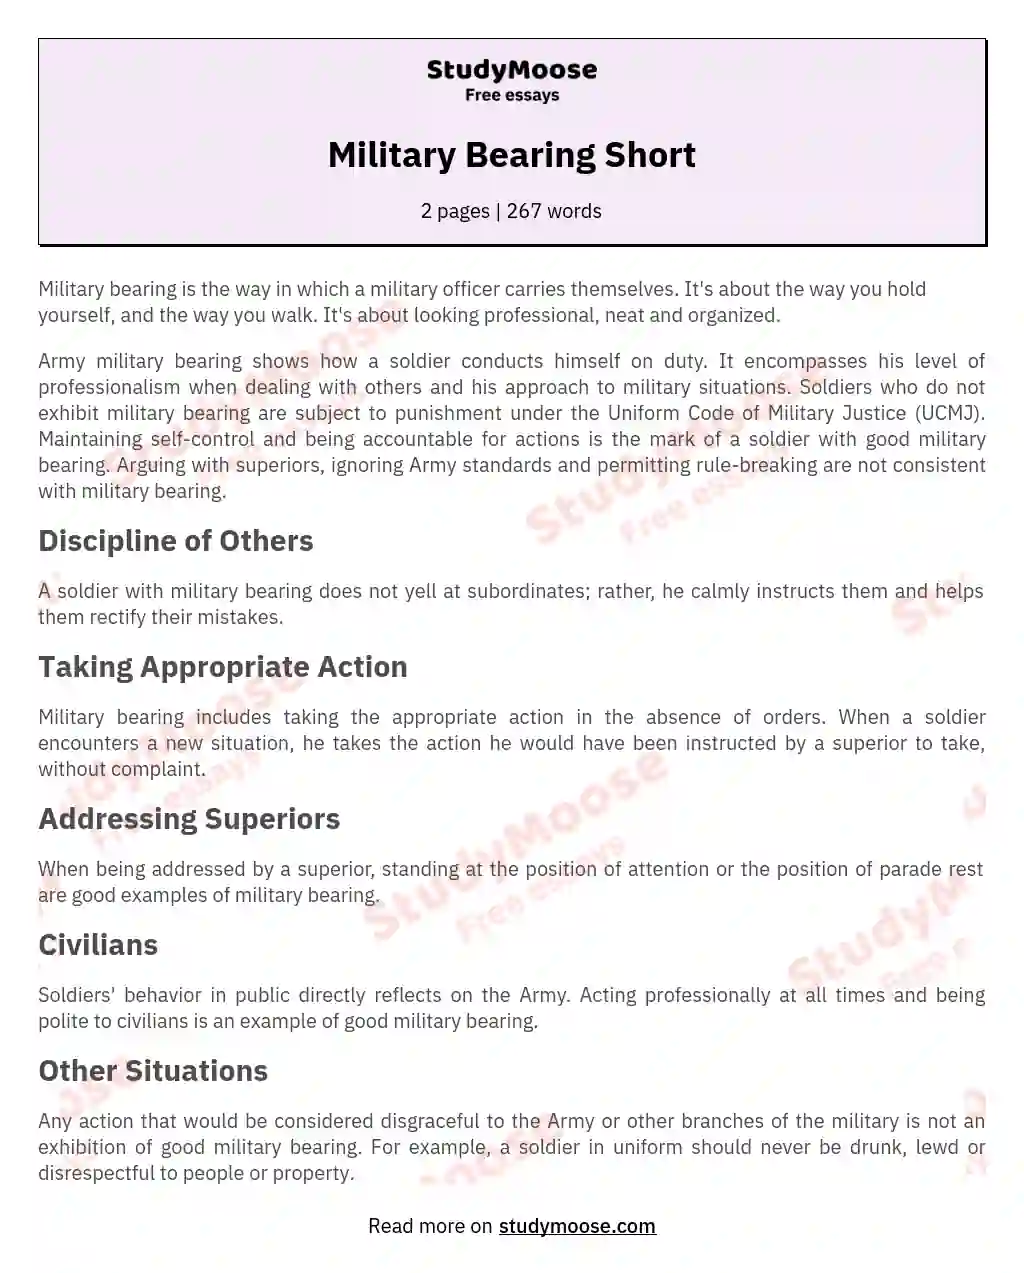 Реферат: Military Bearing Essay Research Paper In the